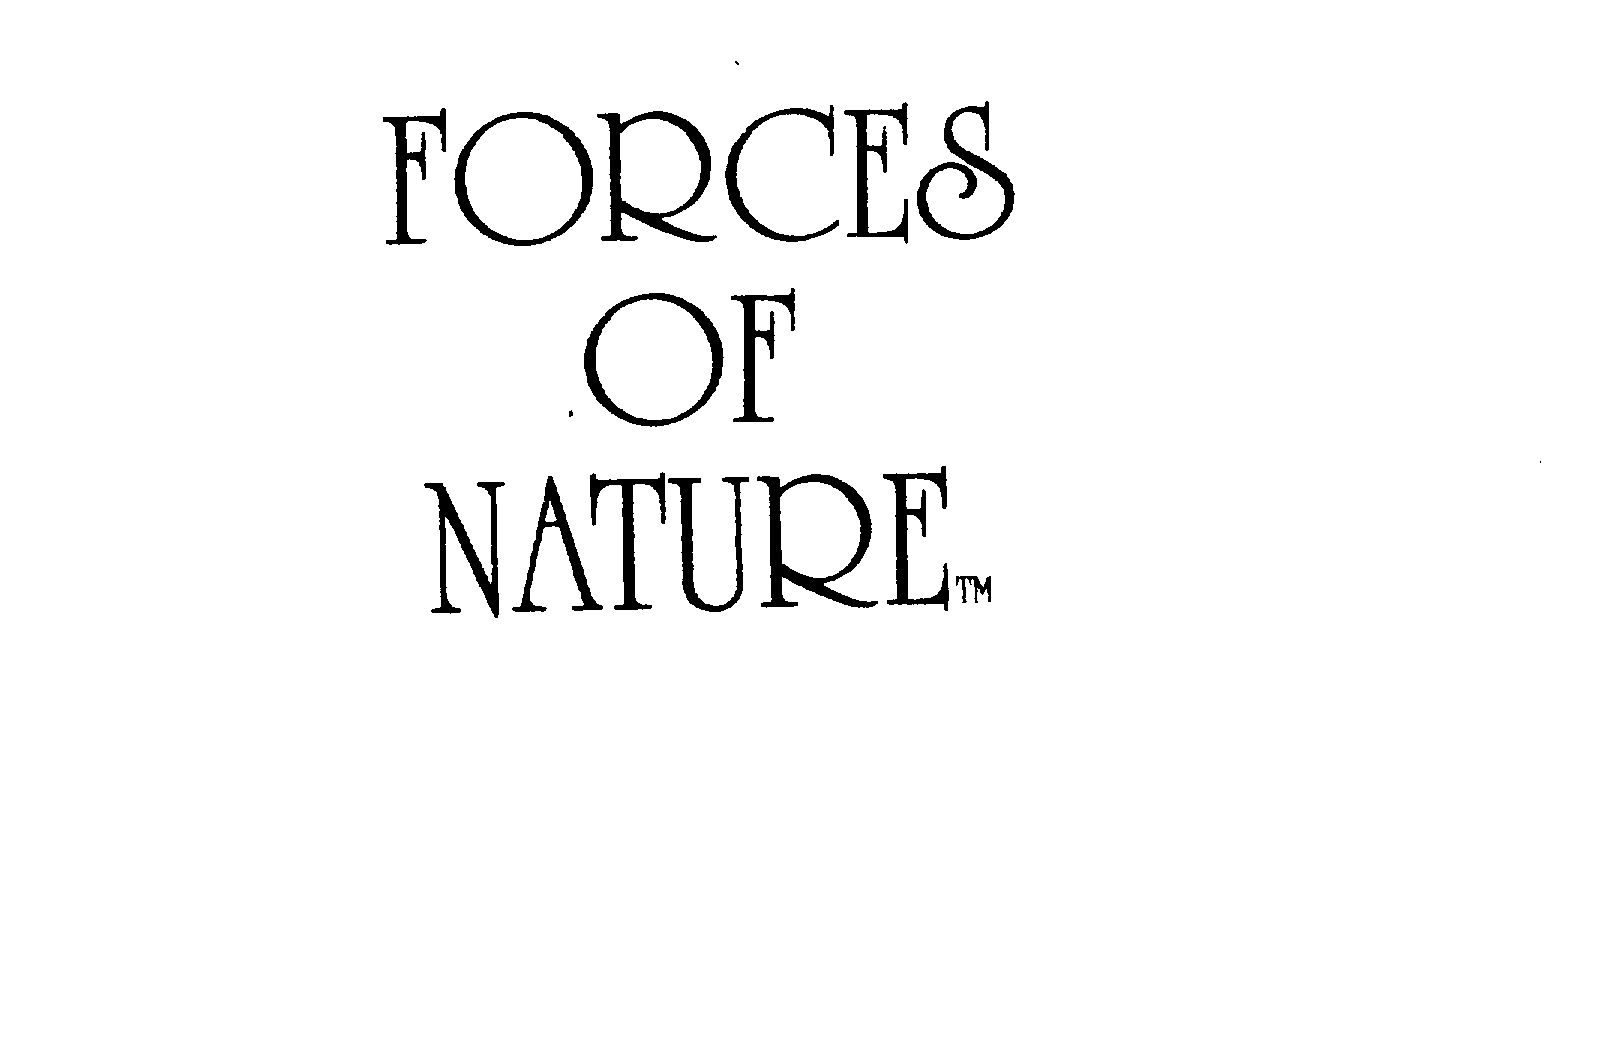 Trademark Logo FORCES OF NATURE